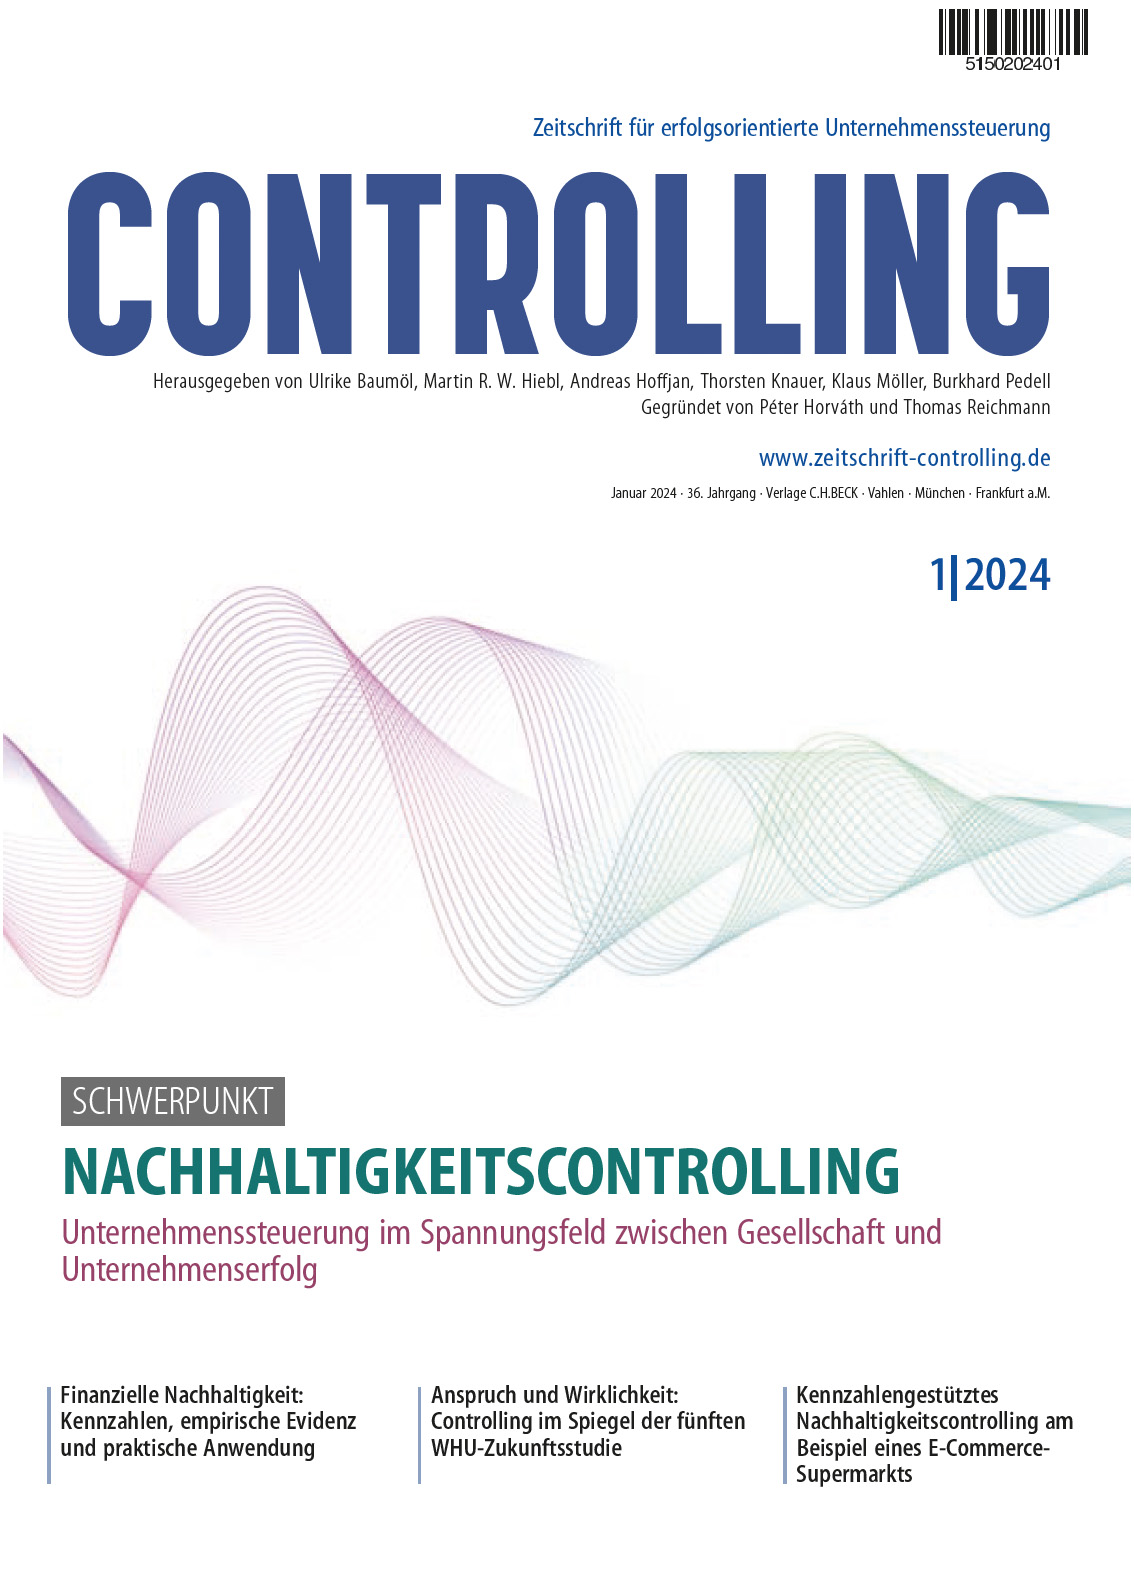 Controlling 1_2024_Umschlag